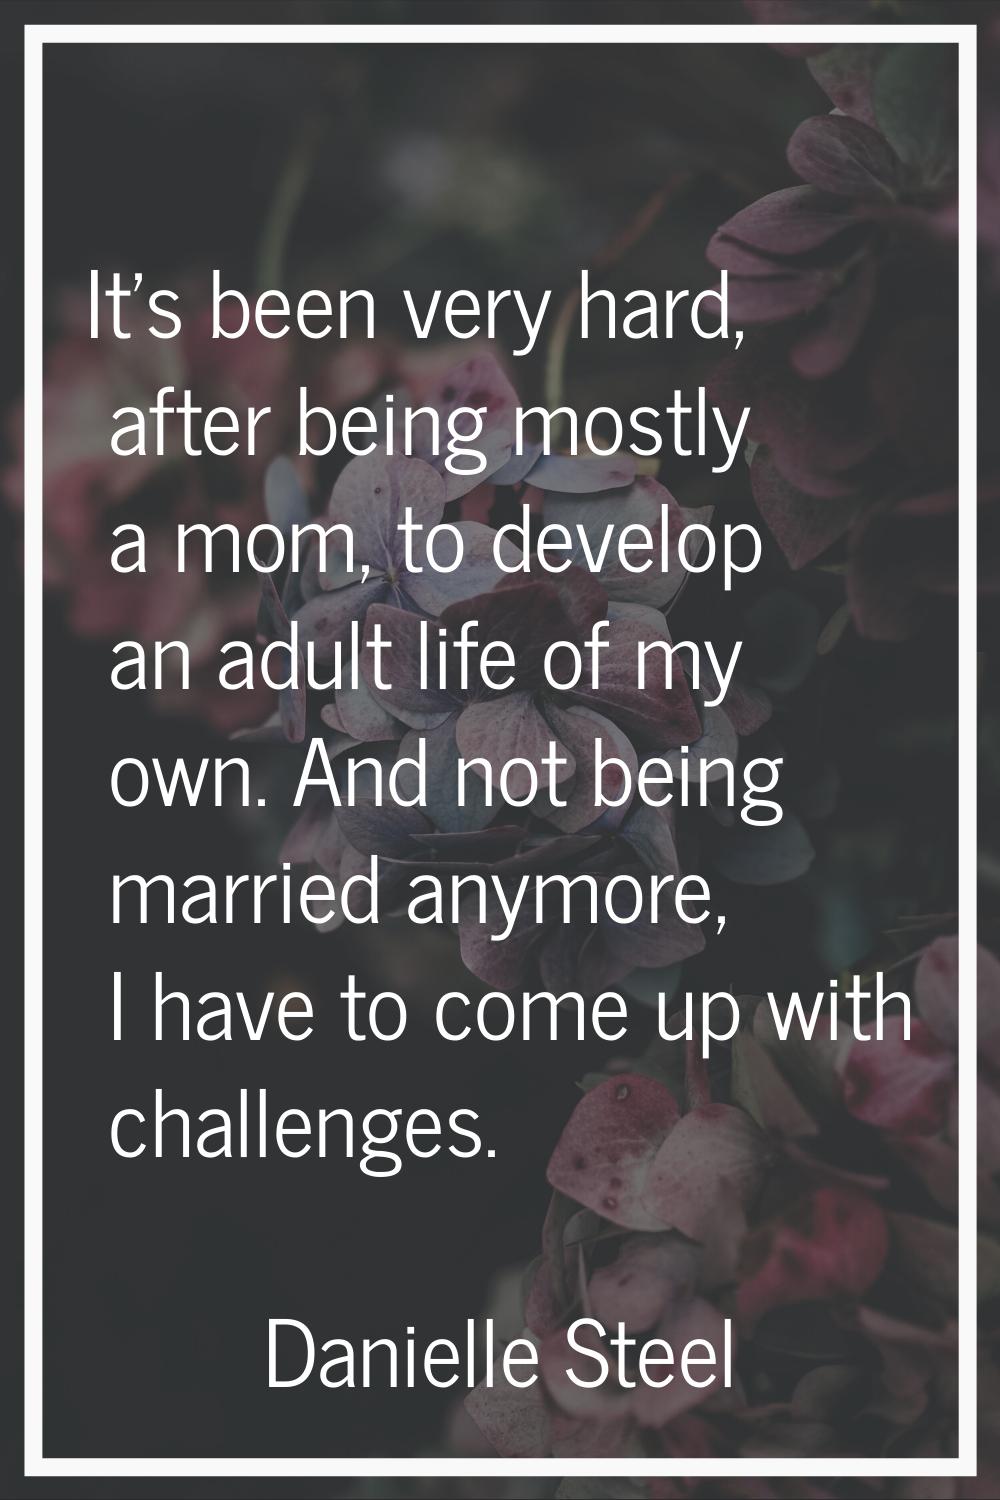 It's been very hard, after being mostly a mom, to develop an adult life of my own. And not being ma